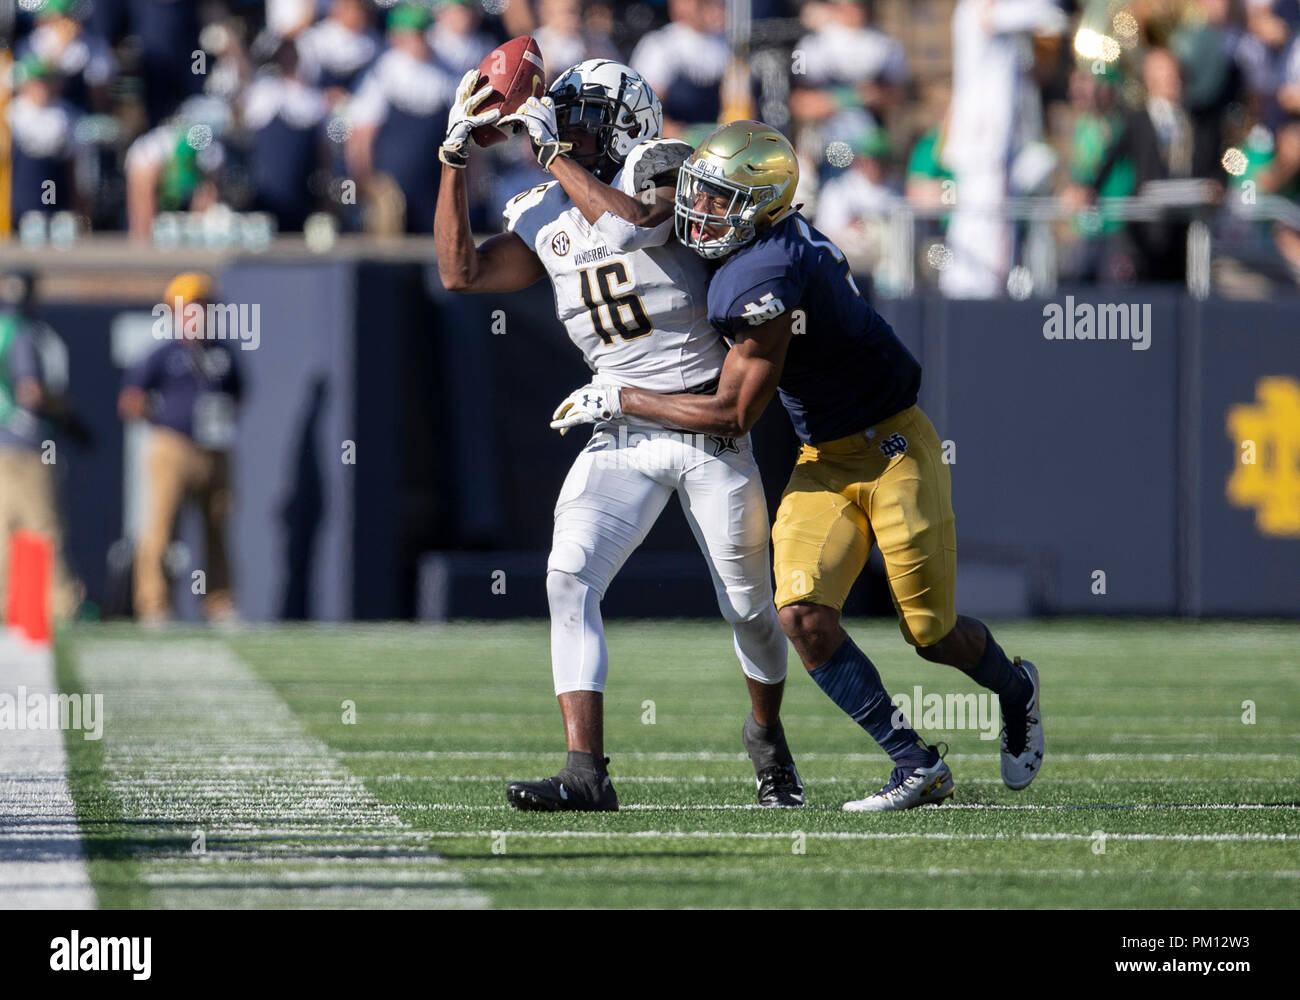 South Bend, Indiana, USA. 15th Sep, 2018. Vanderbilt wide receiver Kalija Lipscomb (16) makes the catch as Notre Dame defensive back Troy Pride Jr. (5) defends during NCAA football game action between the Vanderbilt Commodores and the Notre Dame Fighting Irish at Notre Dame Stadium in South Bend, Indiana. Notre Dame defeated Vanderbilt 22-17. John Mersits/CSM/Alamy Live News Stock Photo